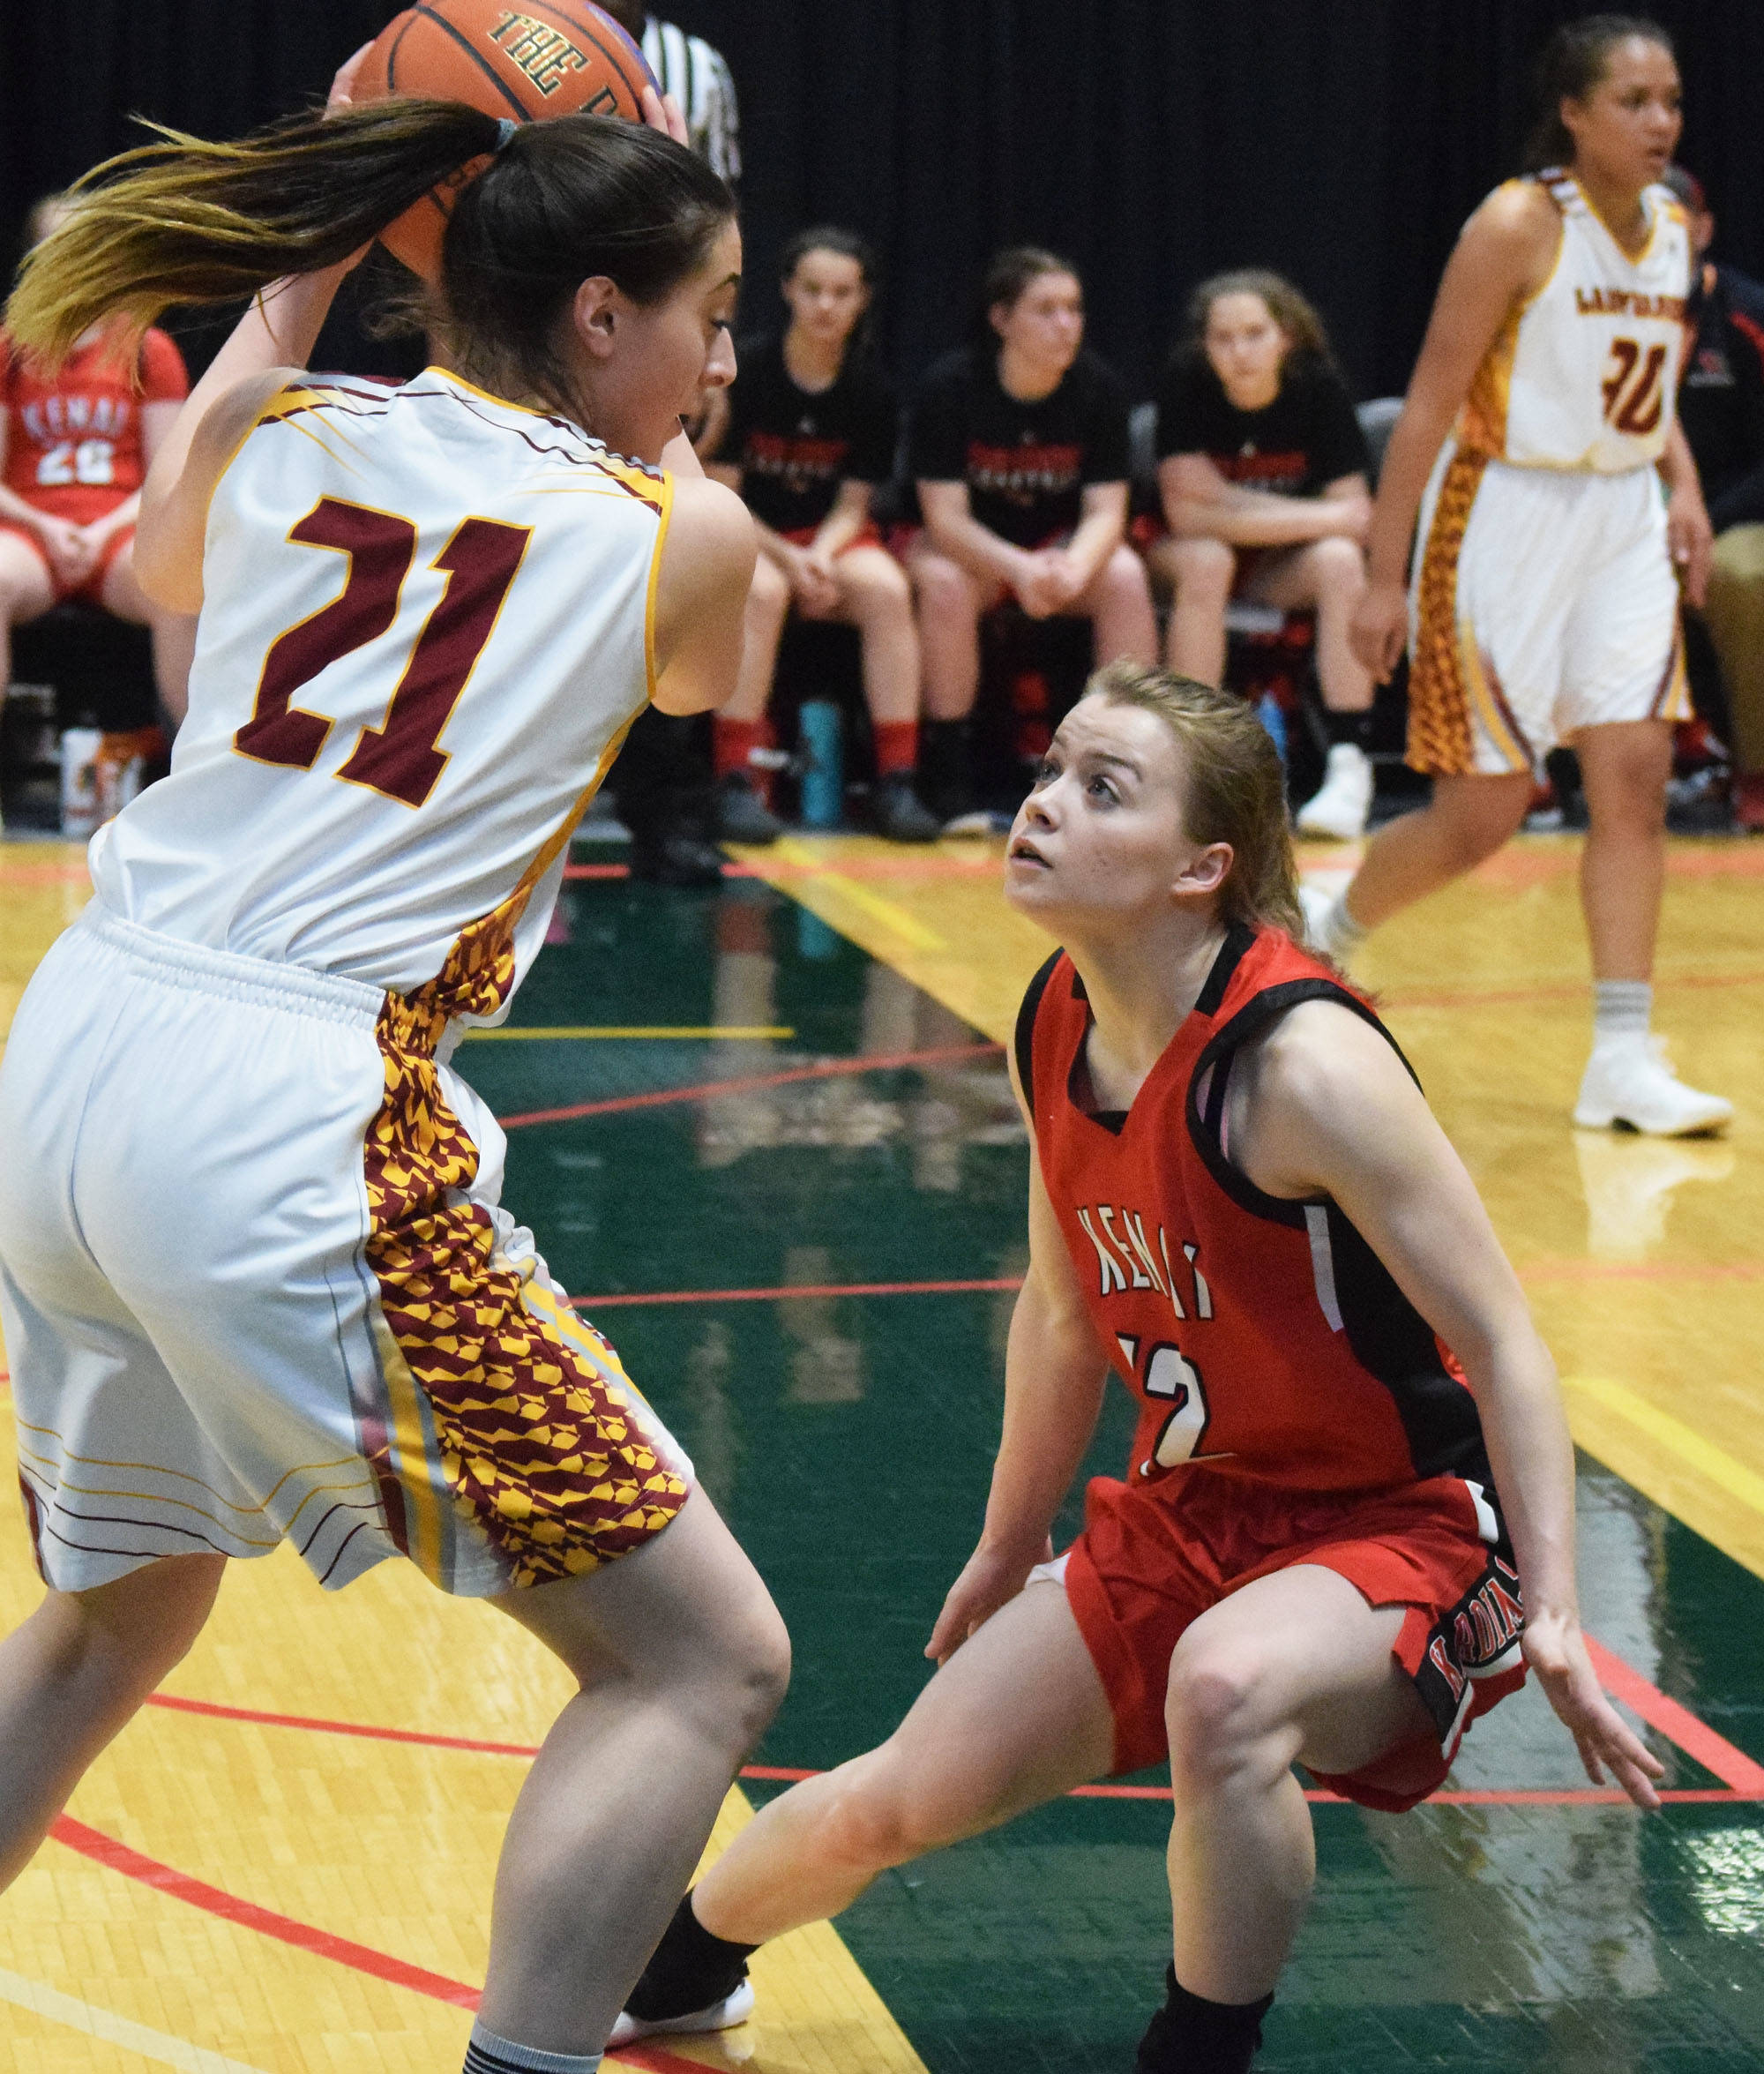 Kenai’s Hayley Maw (right) guards Mt. Edgecumbe’s Leticia Skaflestad Thursday, Mar. 21, 2019, at the Class 3A state championship tournament at the Alaska Airlines Center in Anchorage. (Photo by Joey Klecka/Peninsula Clarion)